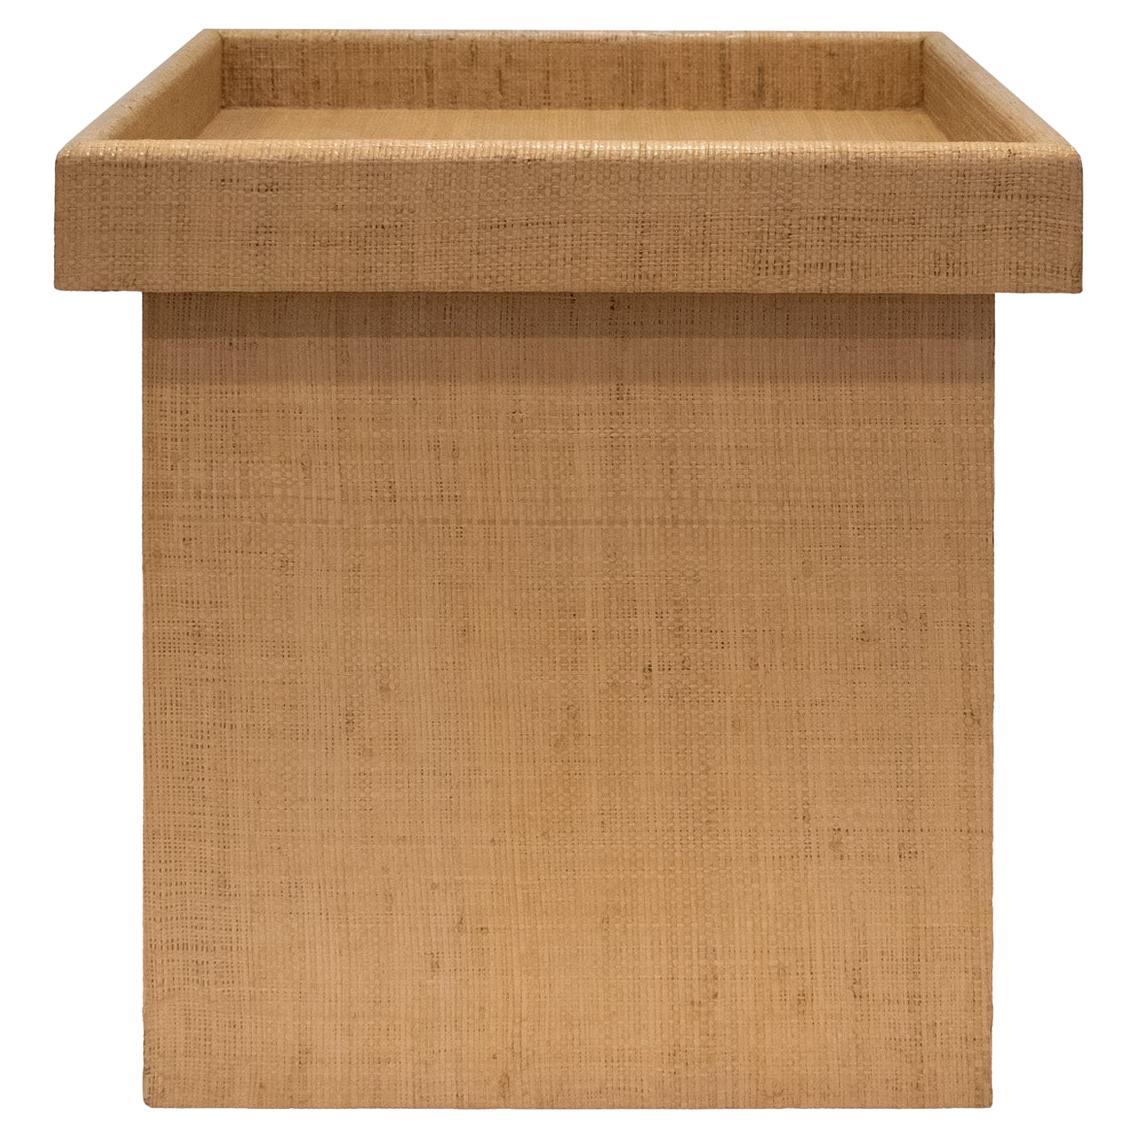 Karl Springer Prototype Box Table with Tray Top in Grasscloth 1976-1978